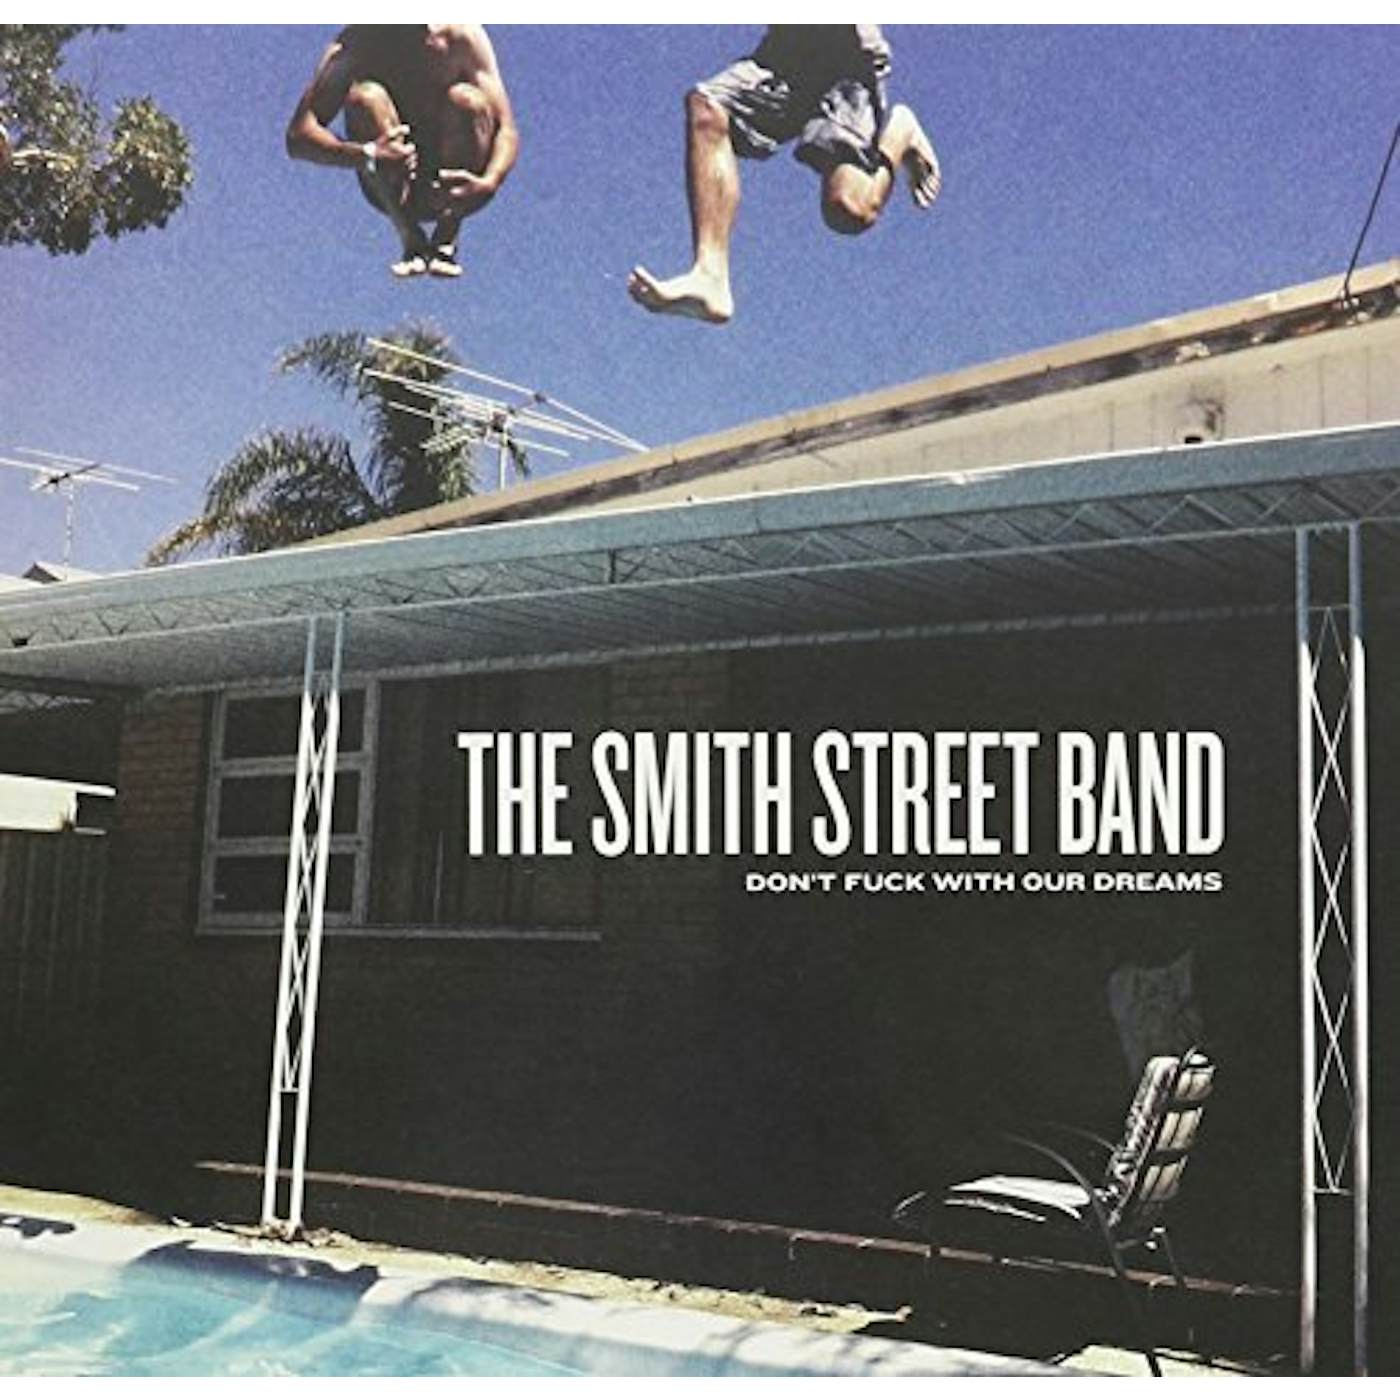 The Smith Street Band Don't Fuck with Our Dreams Vinyl Record